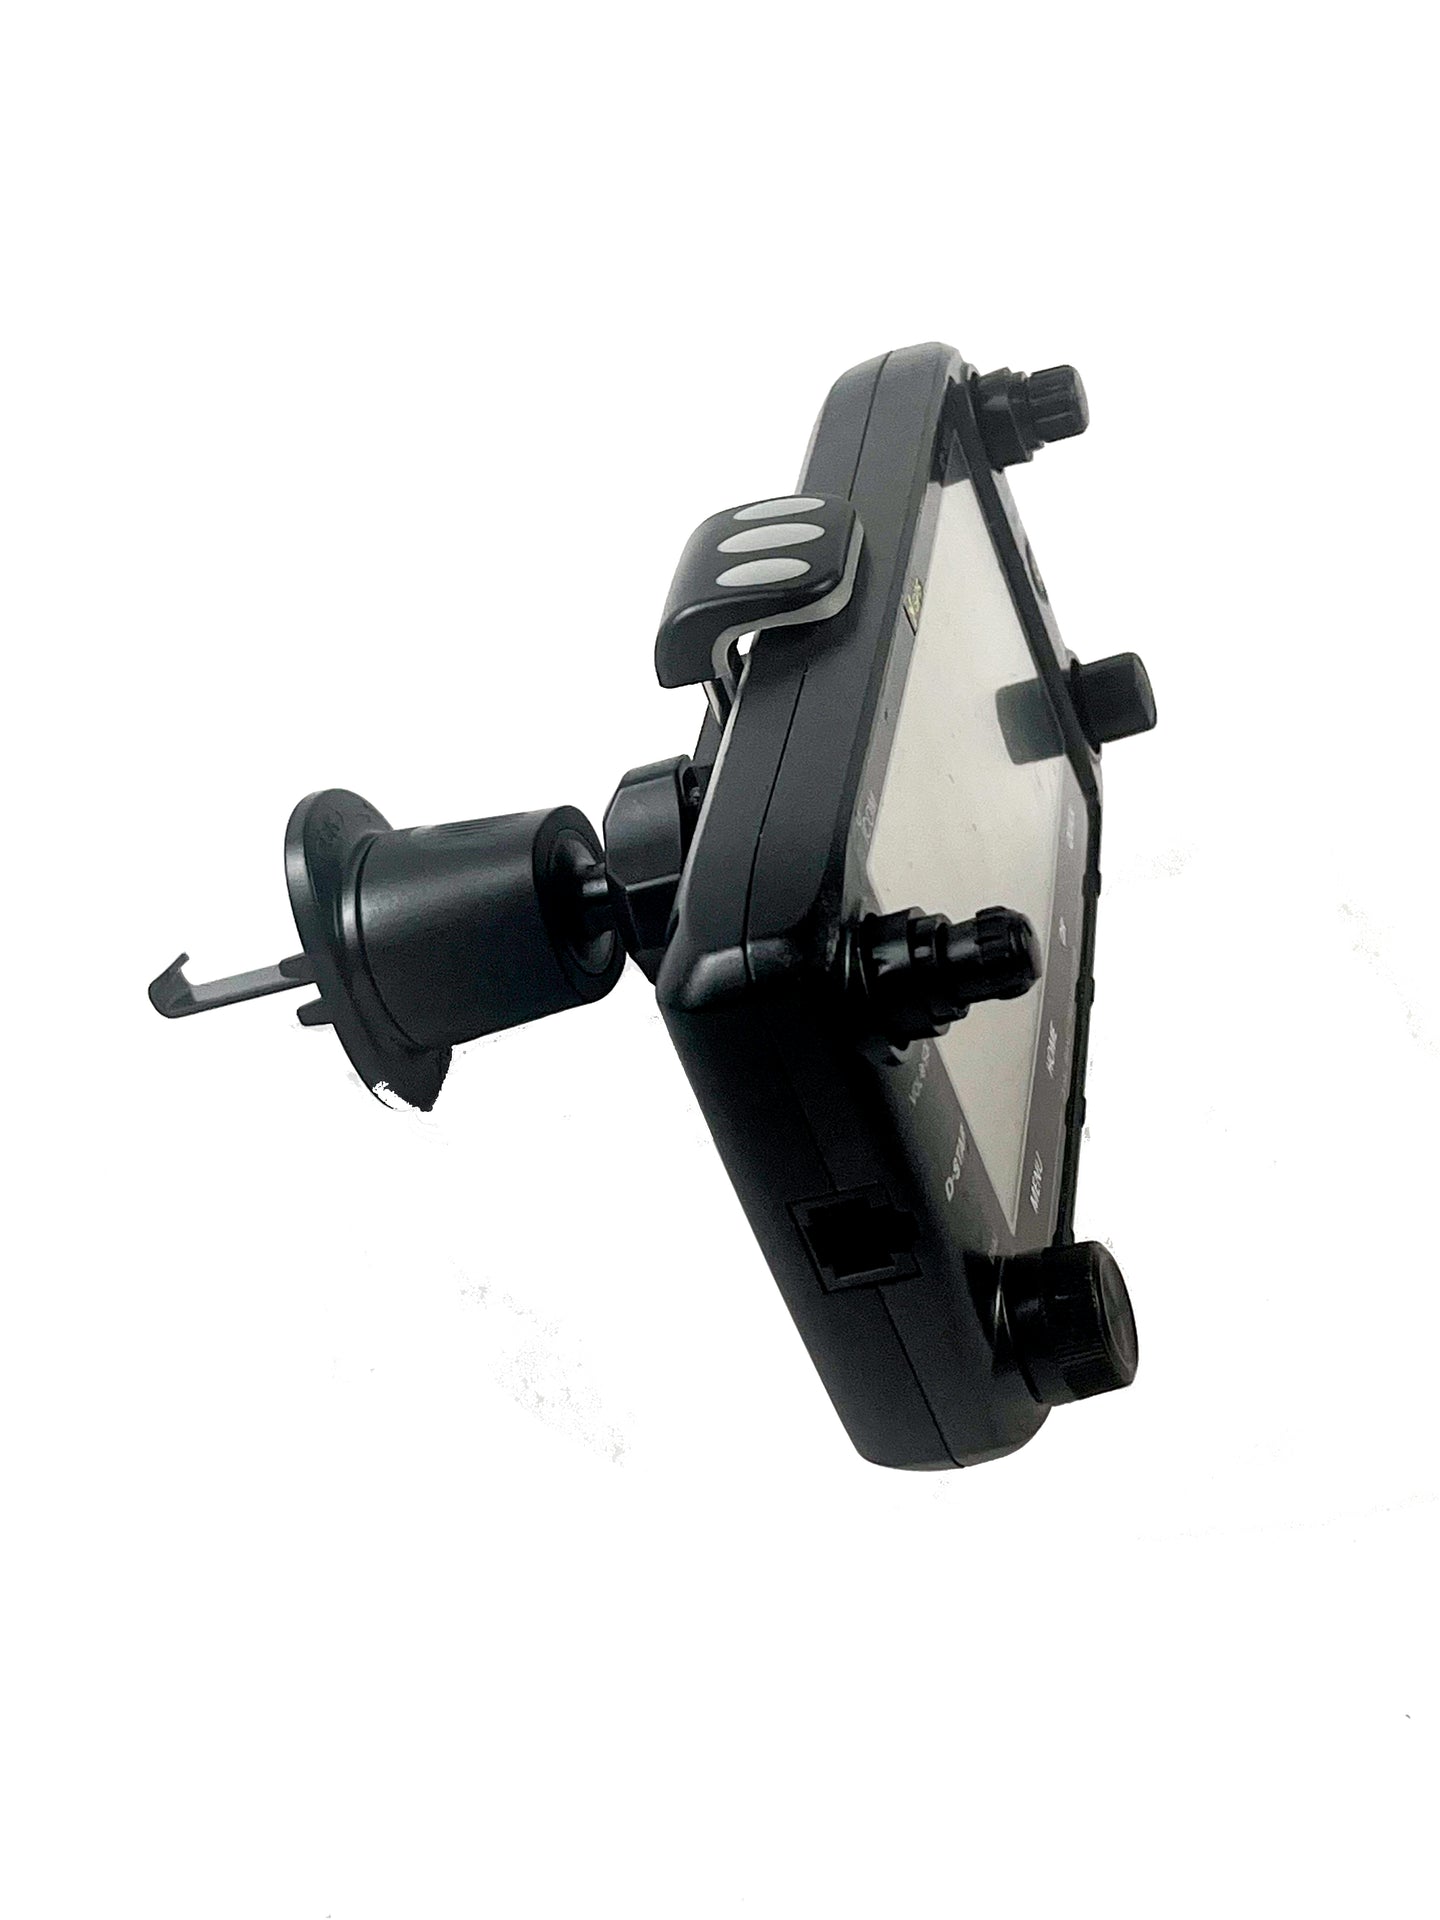 Vent Mount With Hook For Icom ID-5100 IC-706 IC-7000 No Optional Remote Head Bracket Needed!